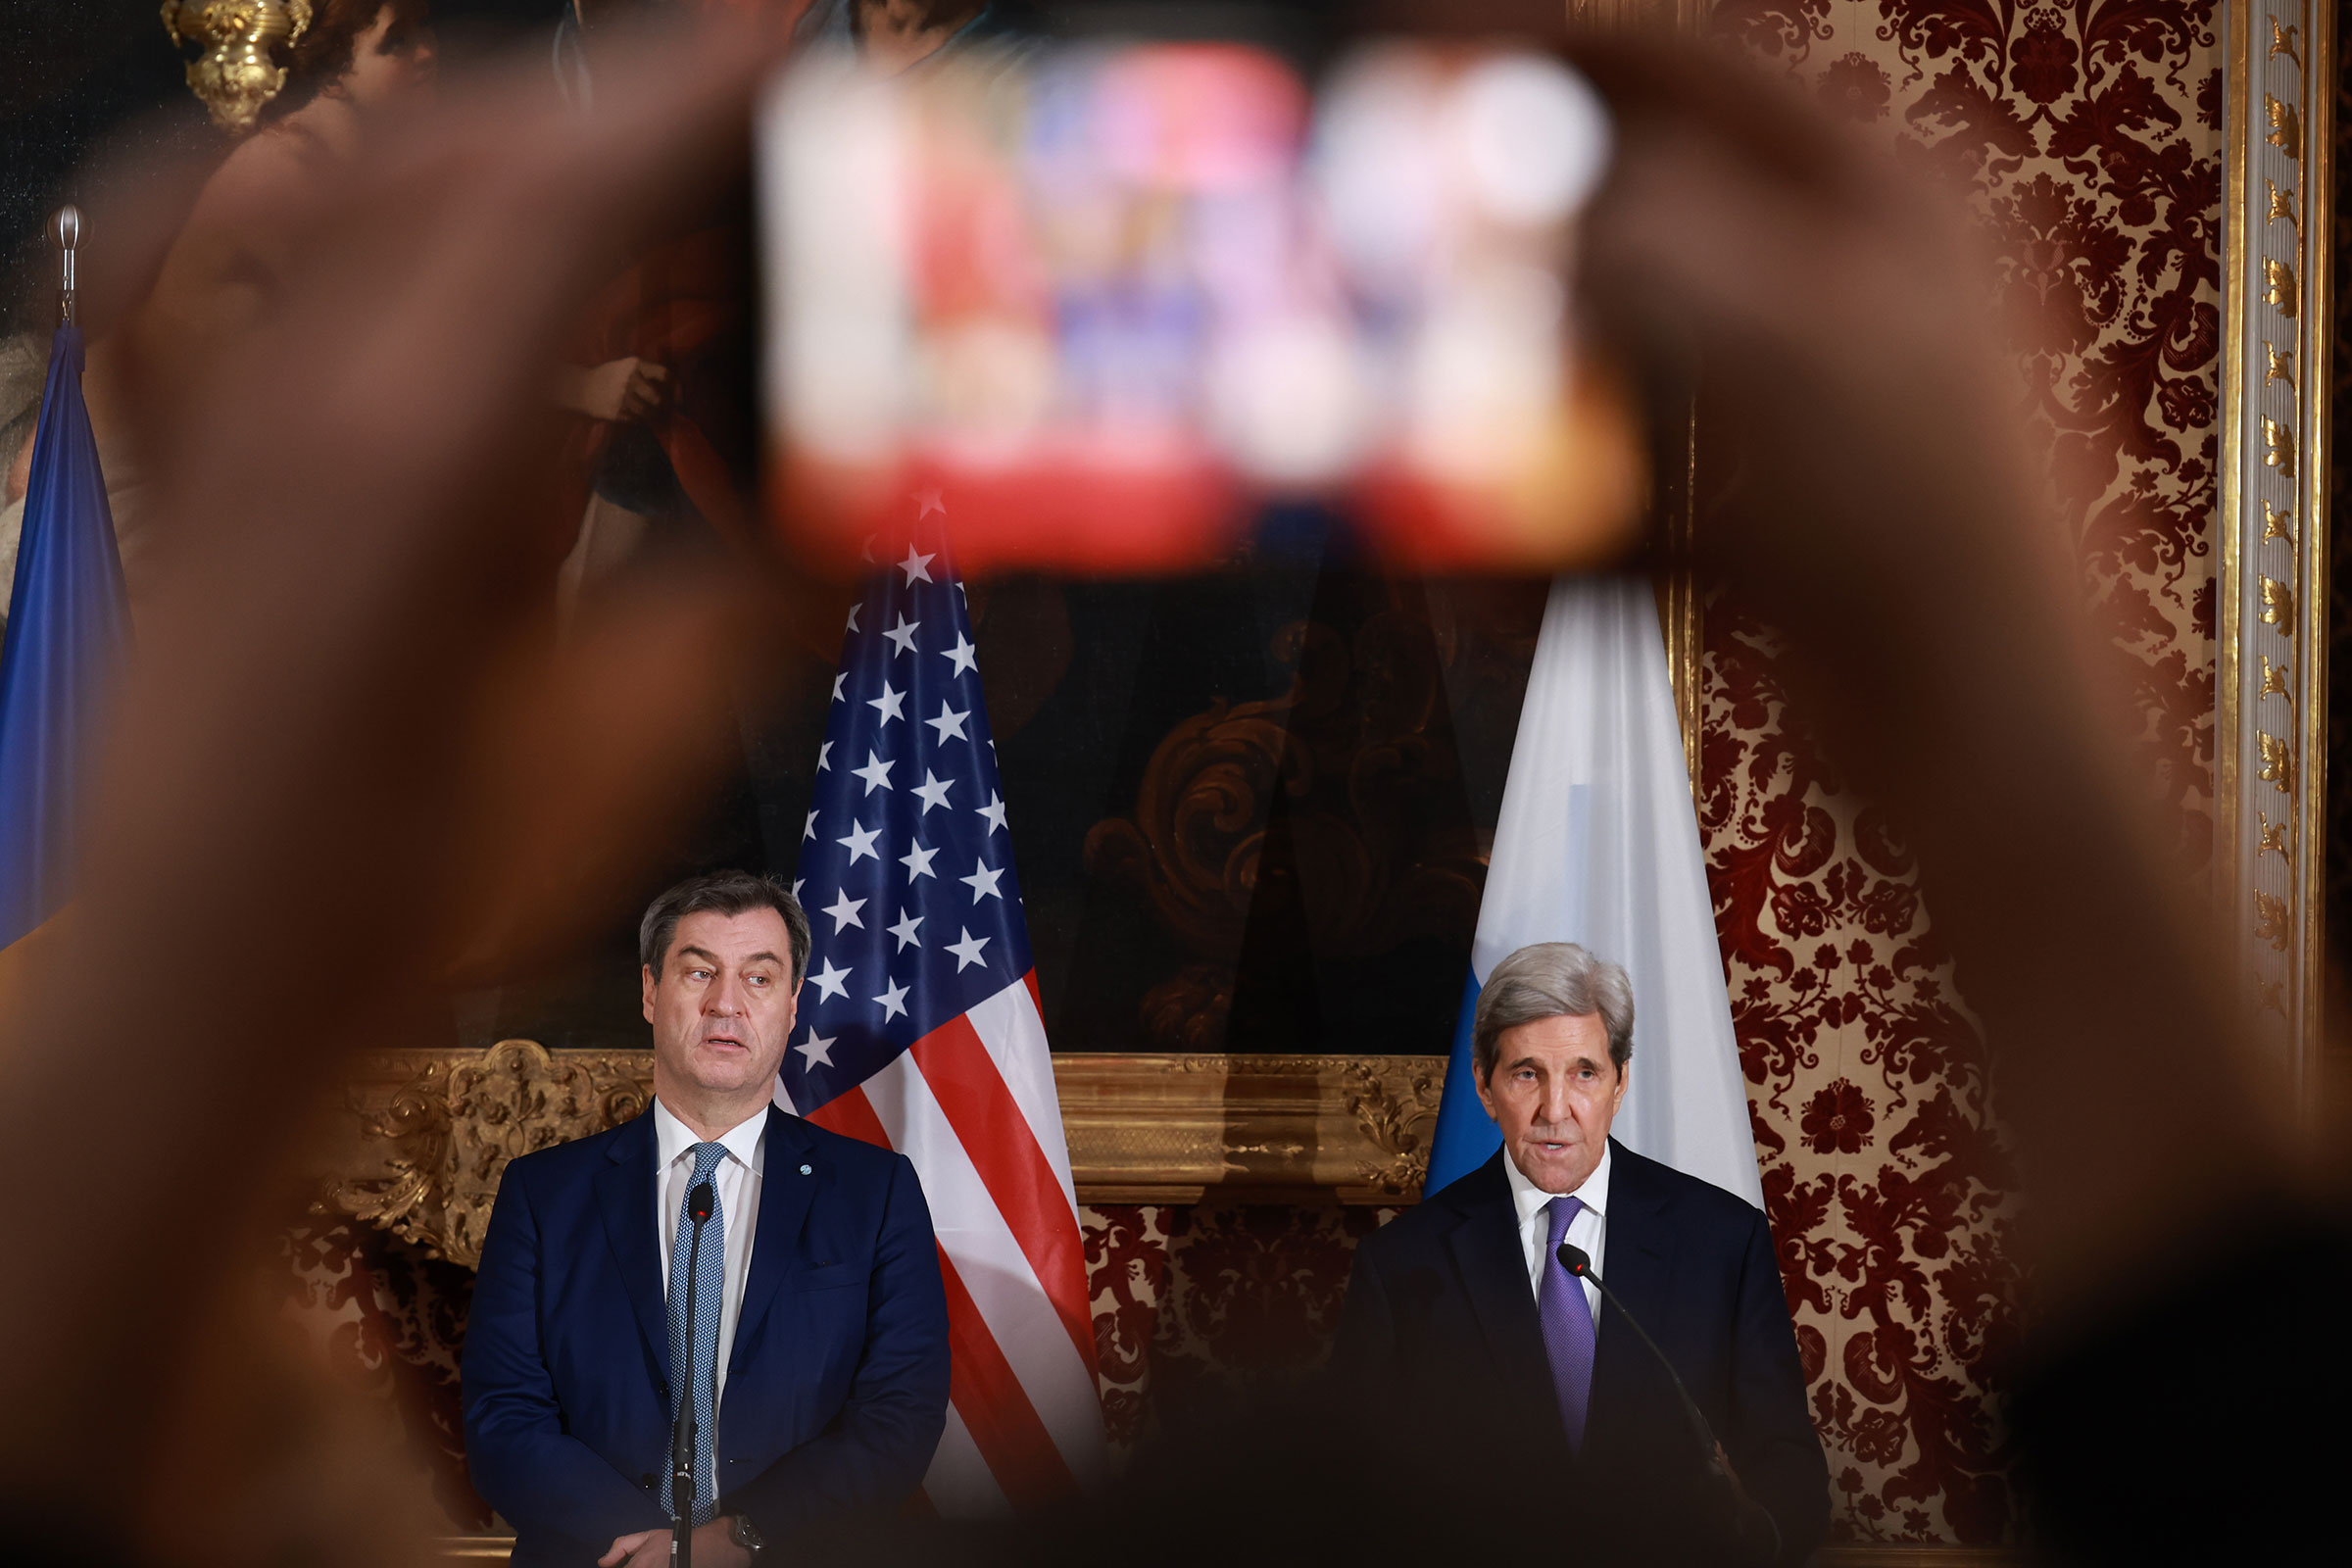 Bavaria's state governor Markus Söder and John Kerry attend a dinner reception at the Munich royal residence during the 2024 Munich Security Conference on Feb. 17, 2024.